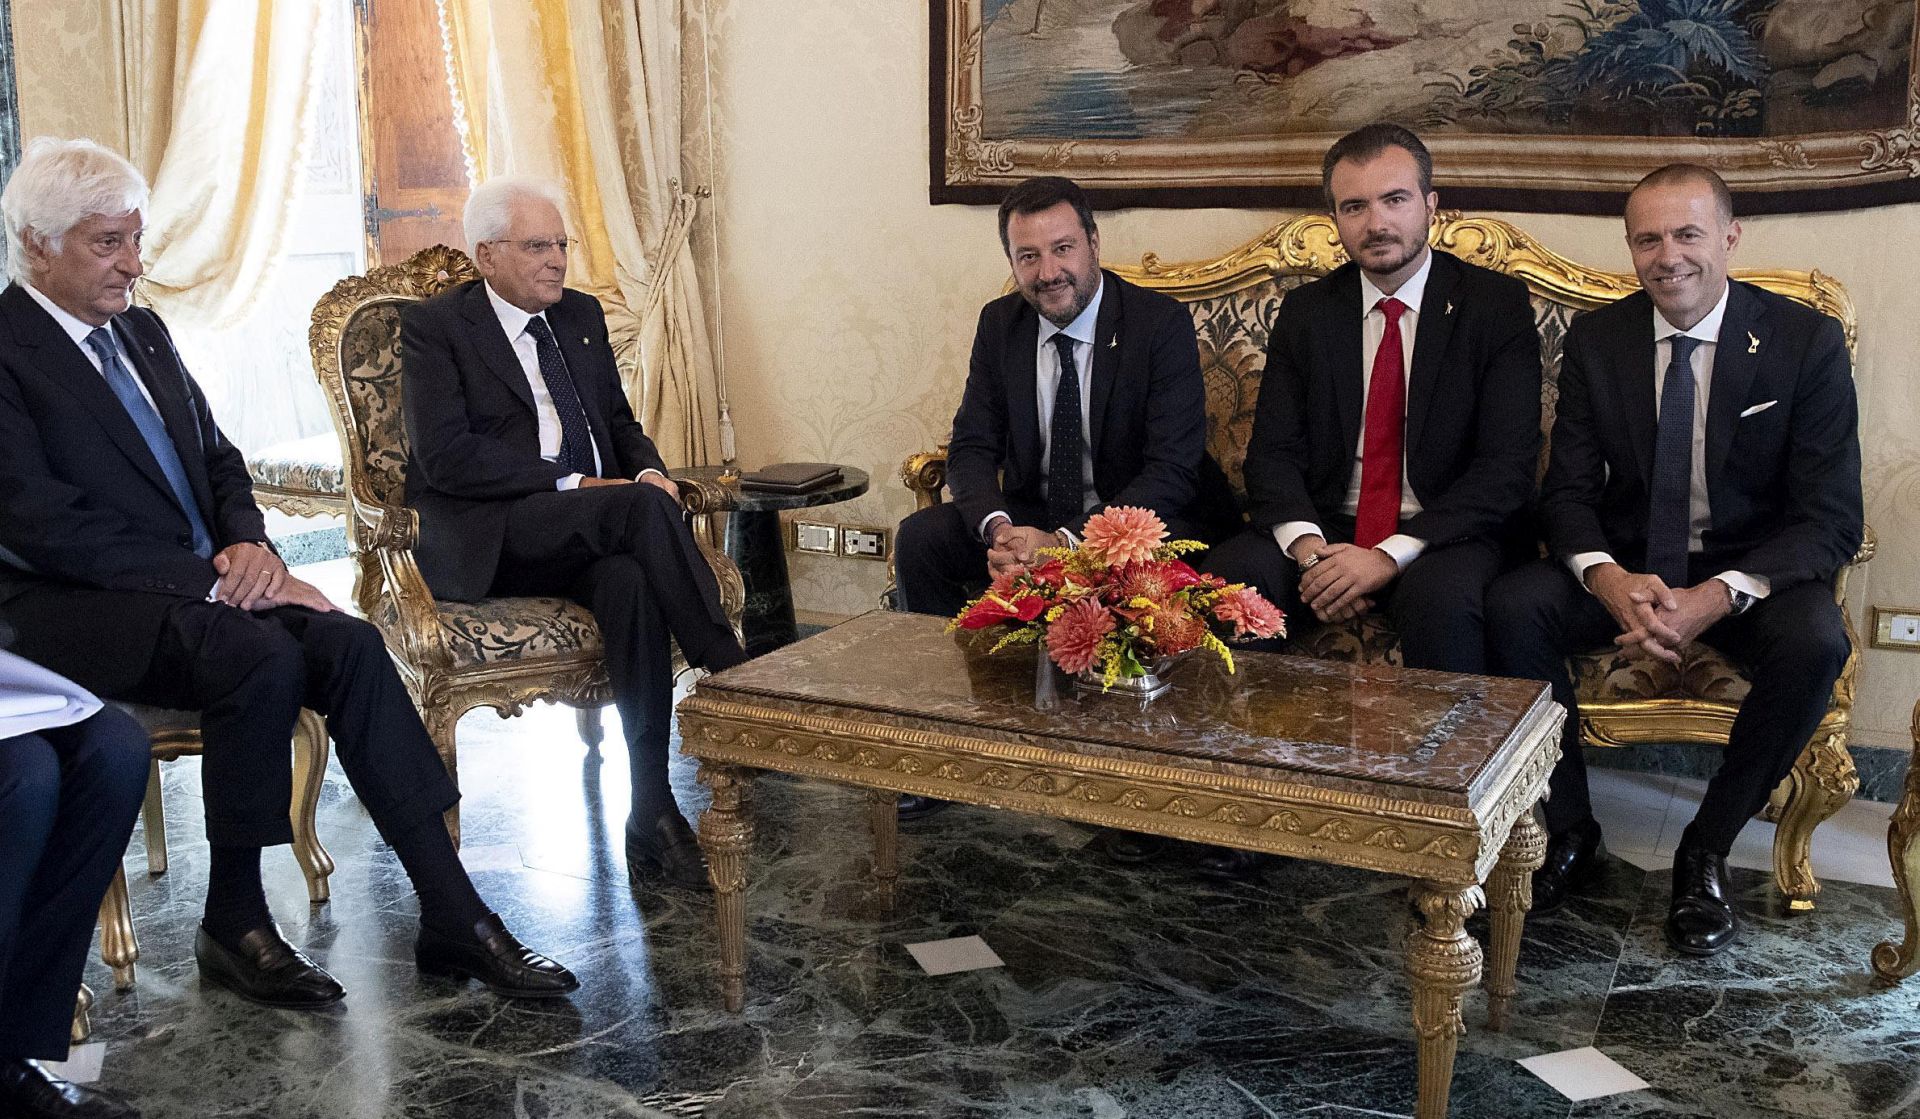 epa07785924 (2-L), meets the deputy premier and leader of League party, Matteo Salvini (C), and his party members Massimiliano Romeo (R) and Riccardo Molinari (2-R) in the Quirinale Palace during the formal political consultations following the resignation of Prime Minister Giuseppe Conte, in Rome, Italy, 22 August 2019.  EPA/Paolo Giandotti HANDOUT  HANDOUT EDITORIAL USE ONLY/NO SALES